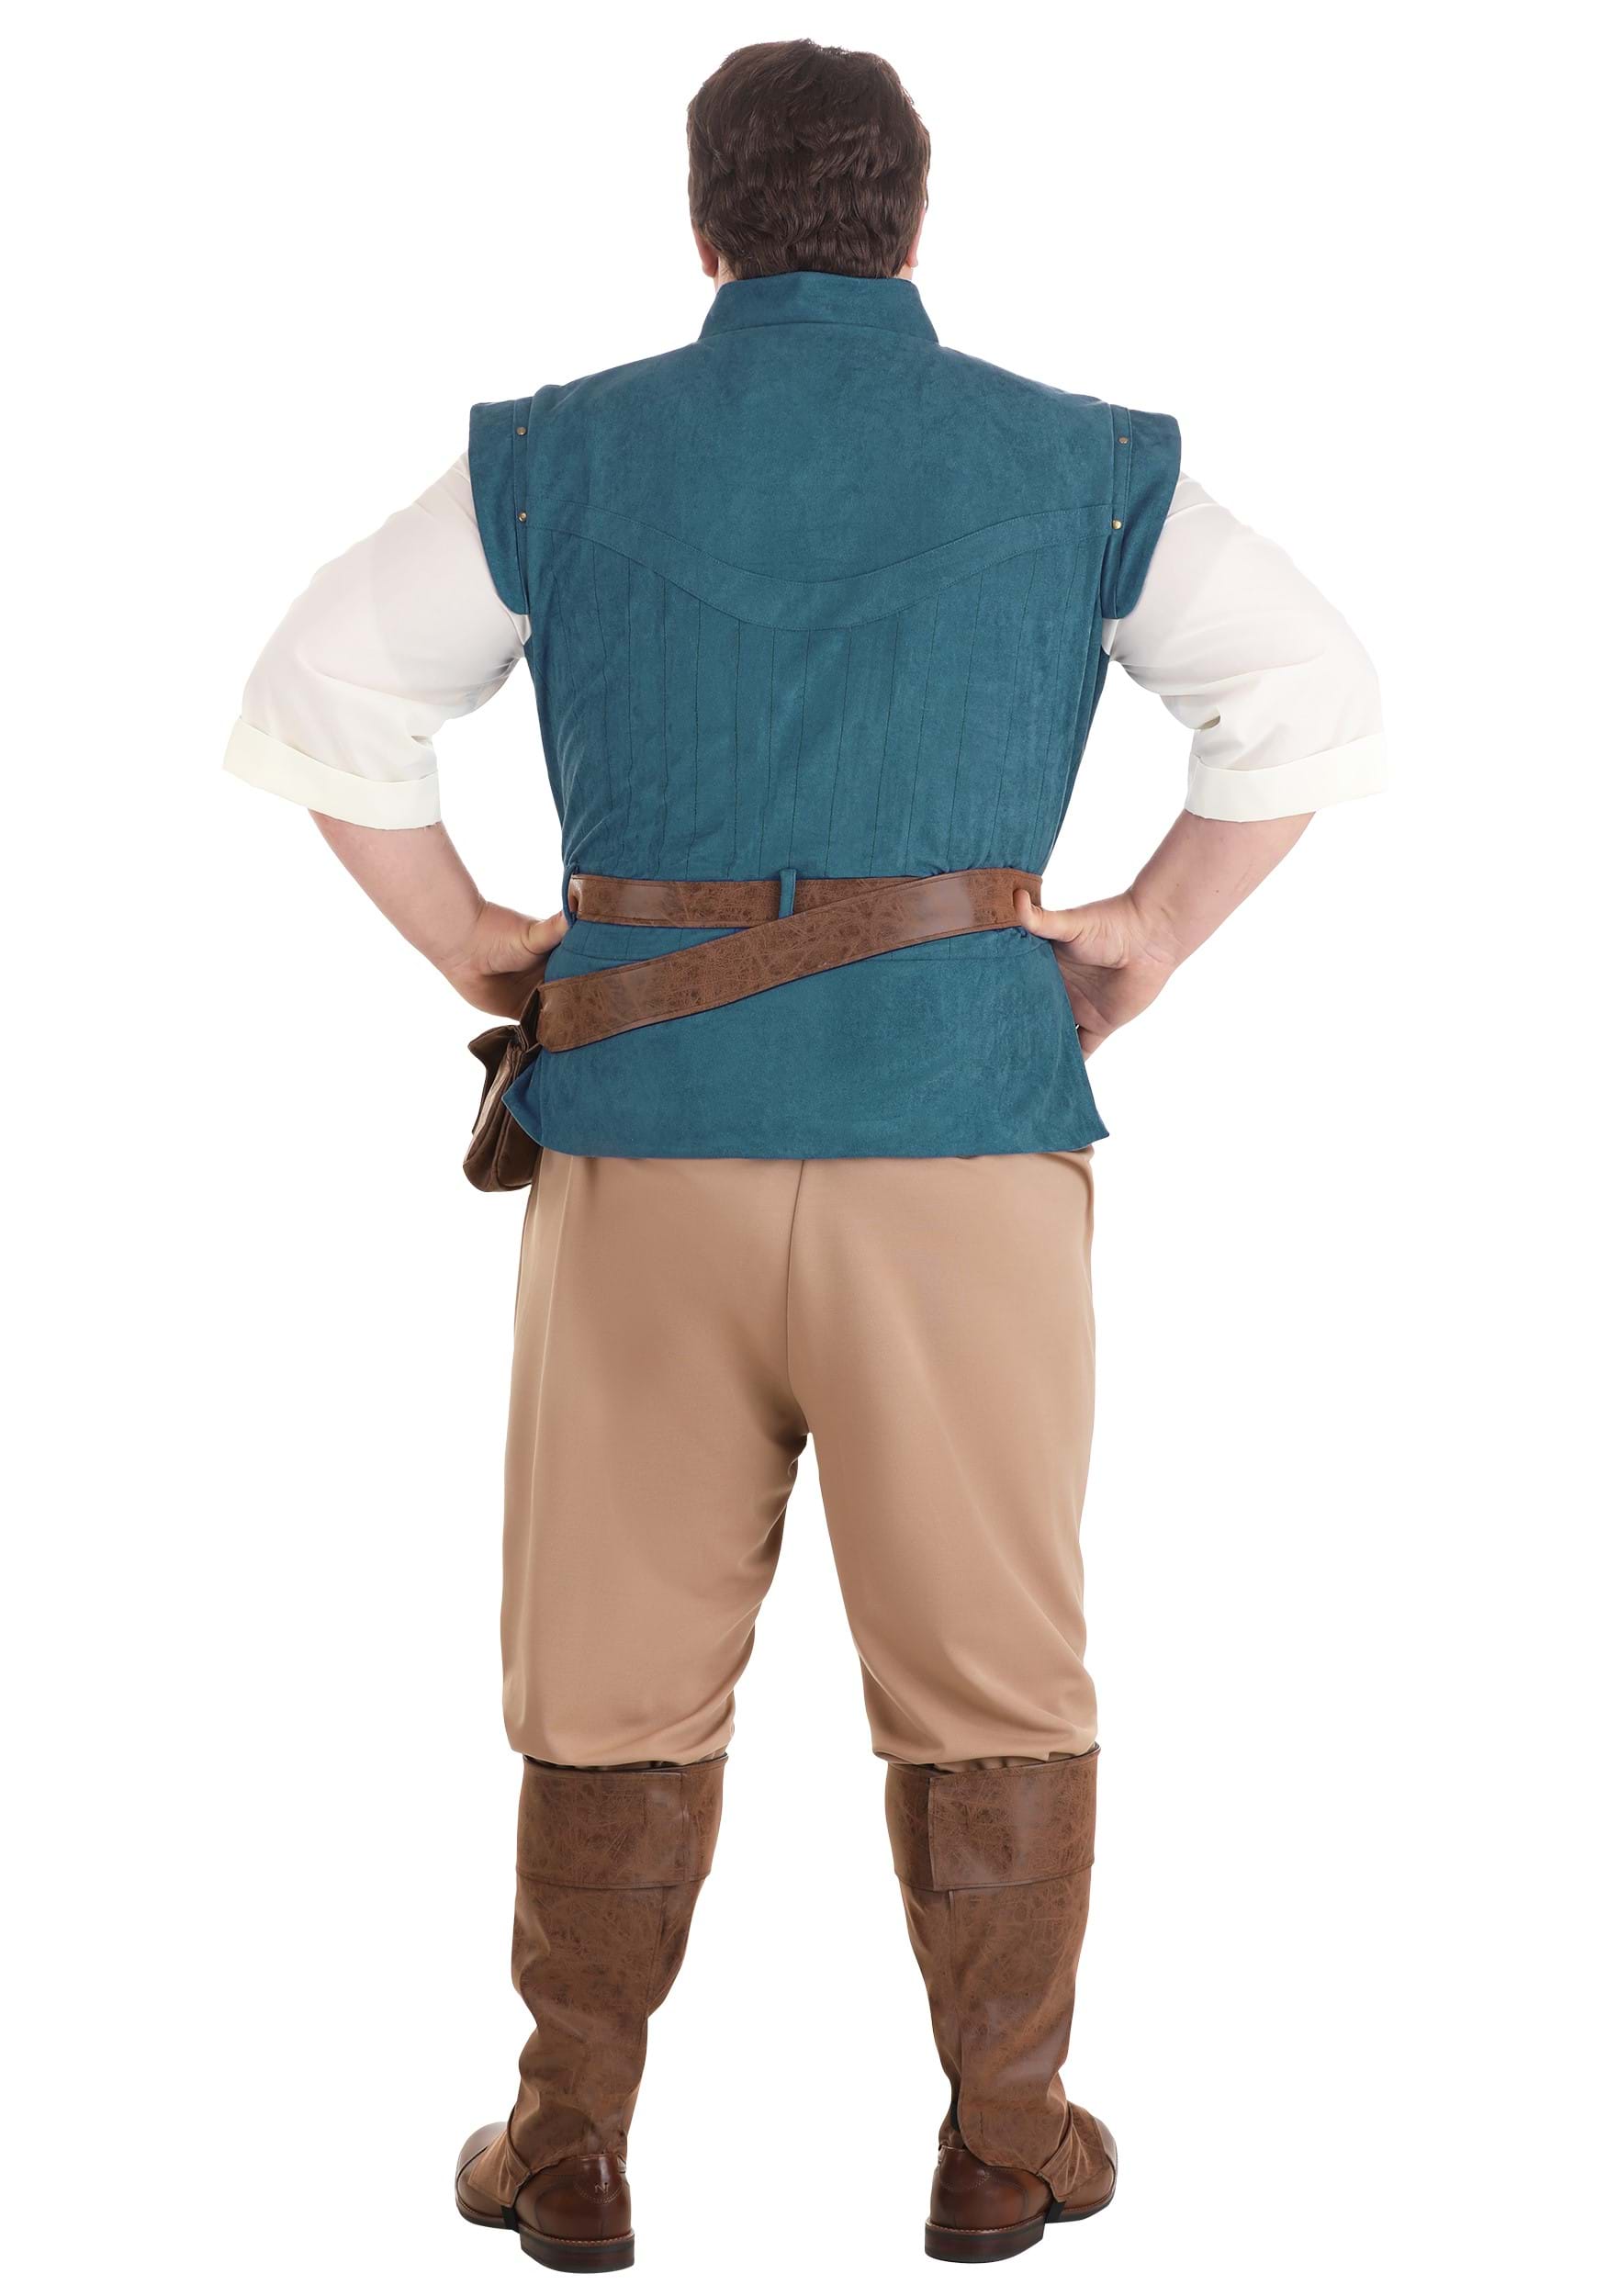 flynn rider costume pattern for adults